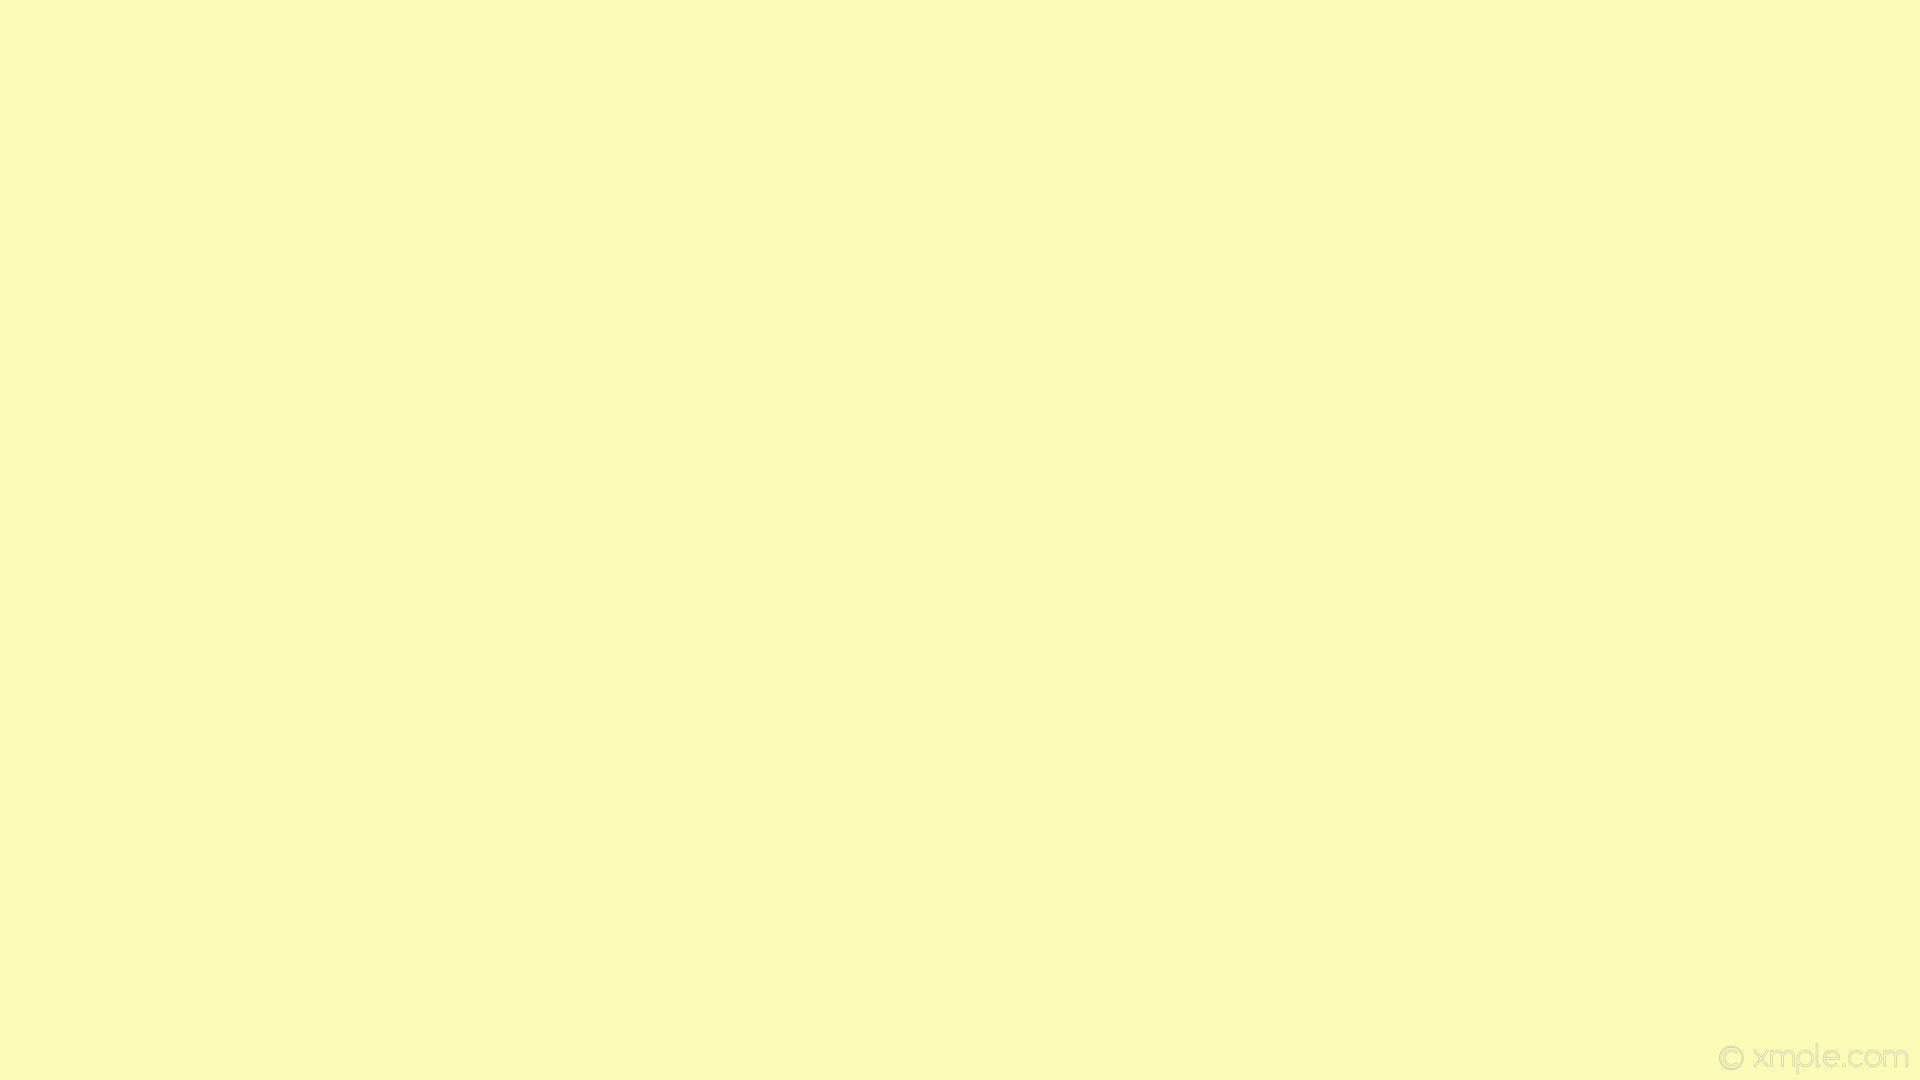 The color of a yellow wall - Light yellow